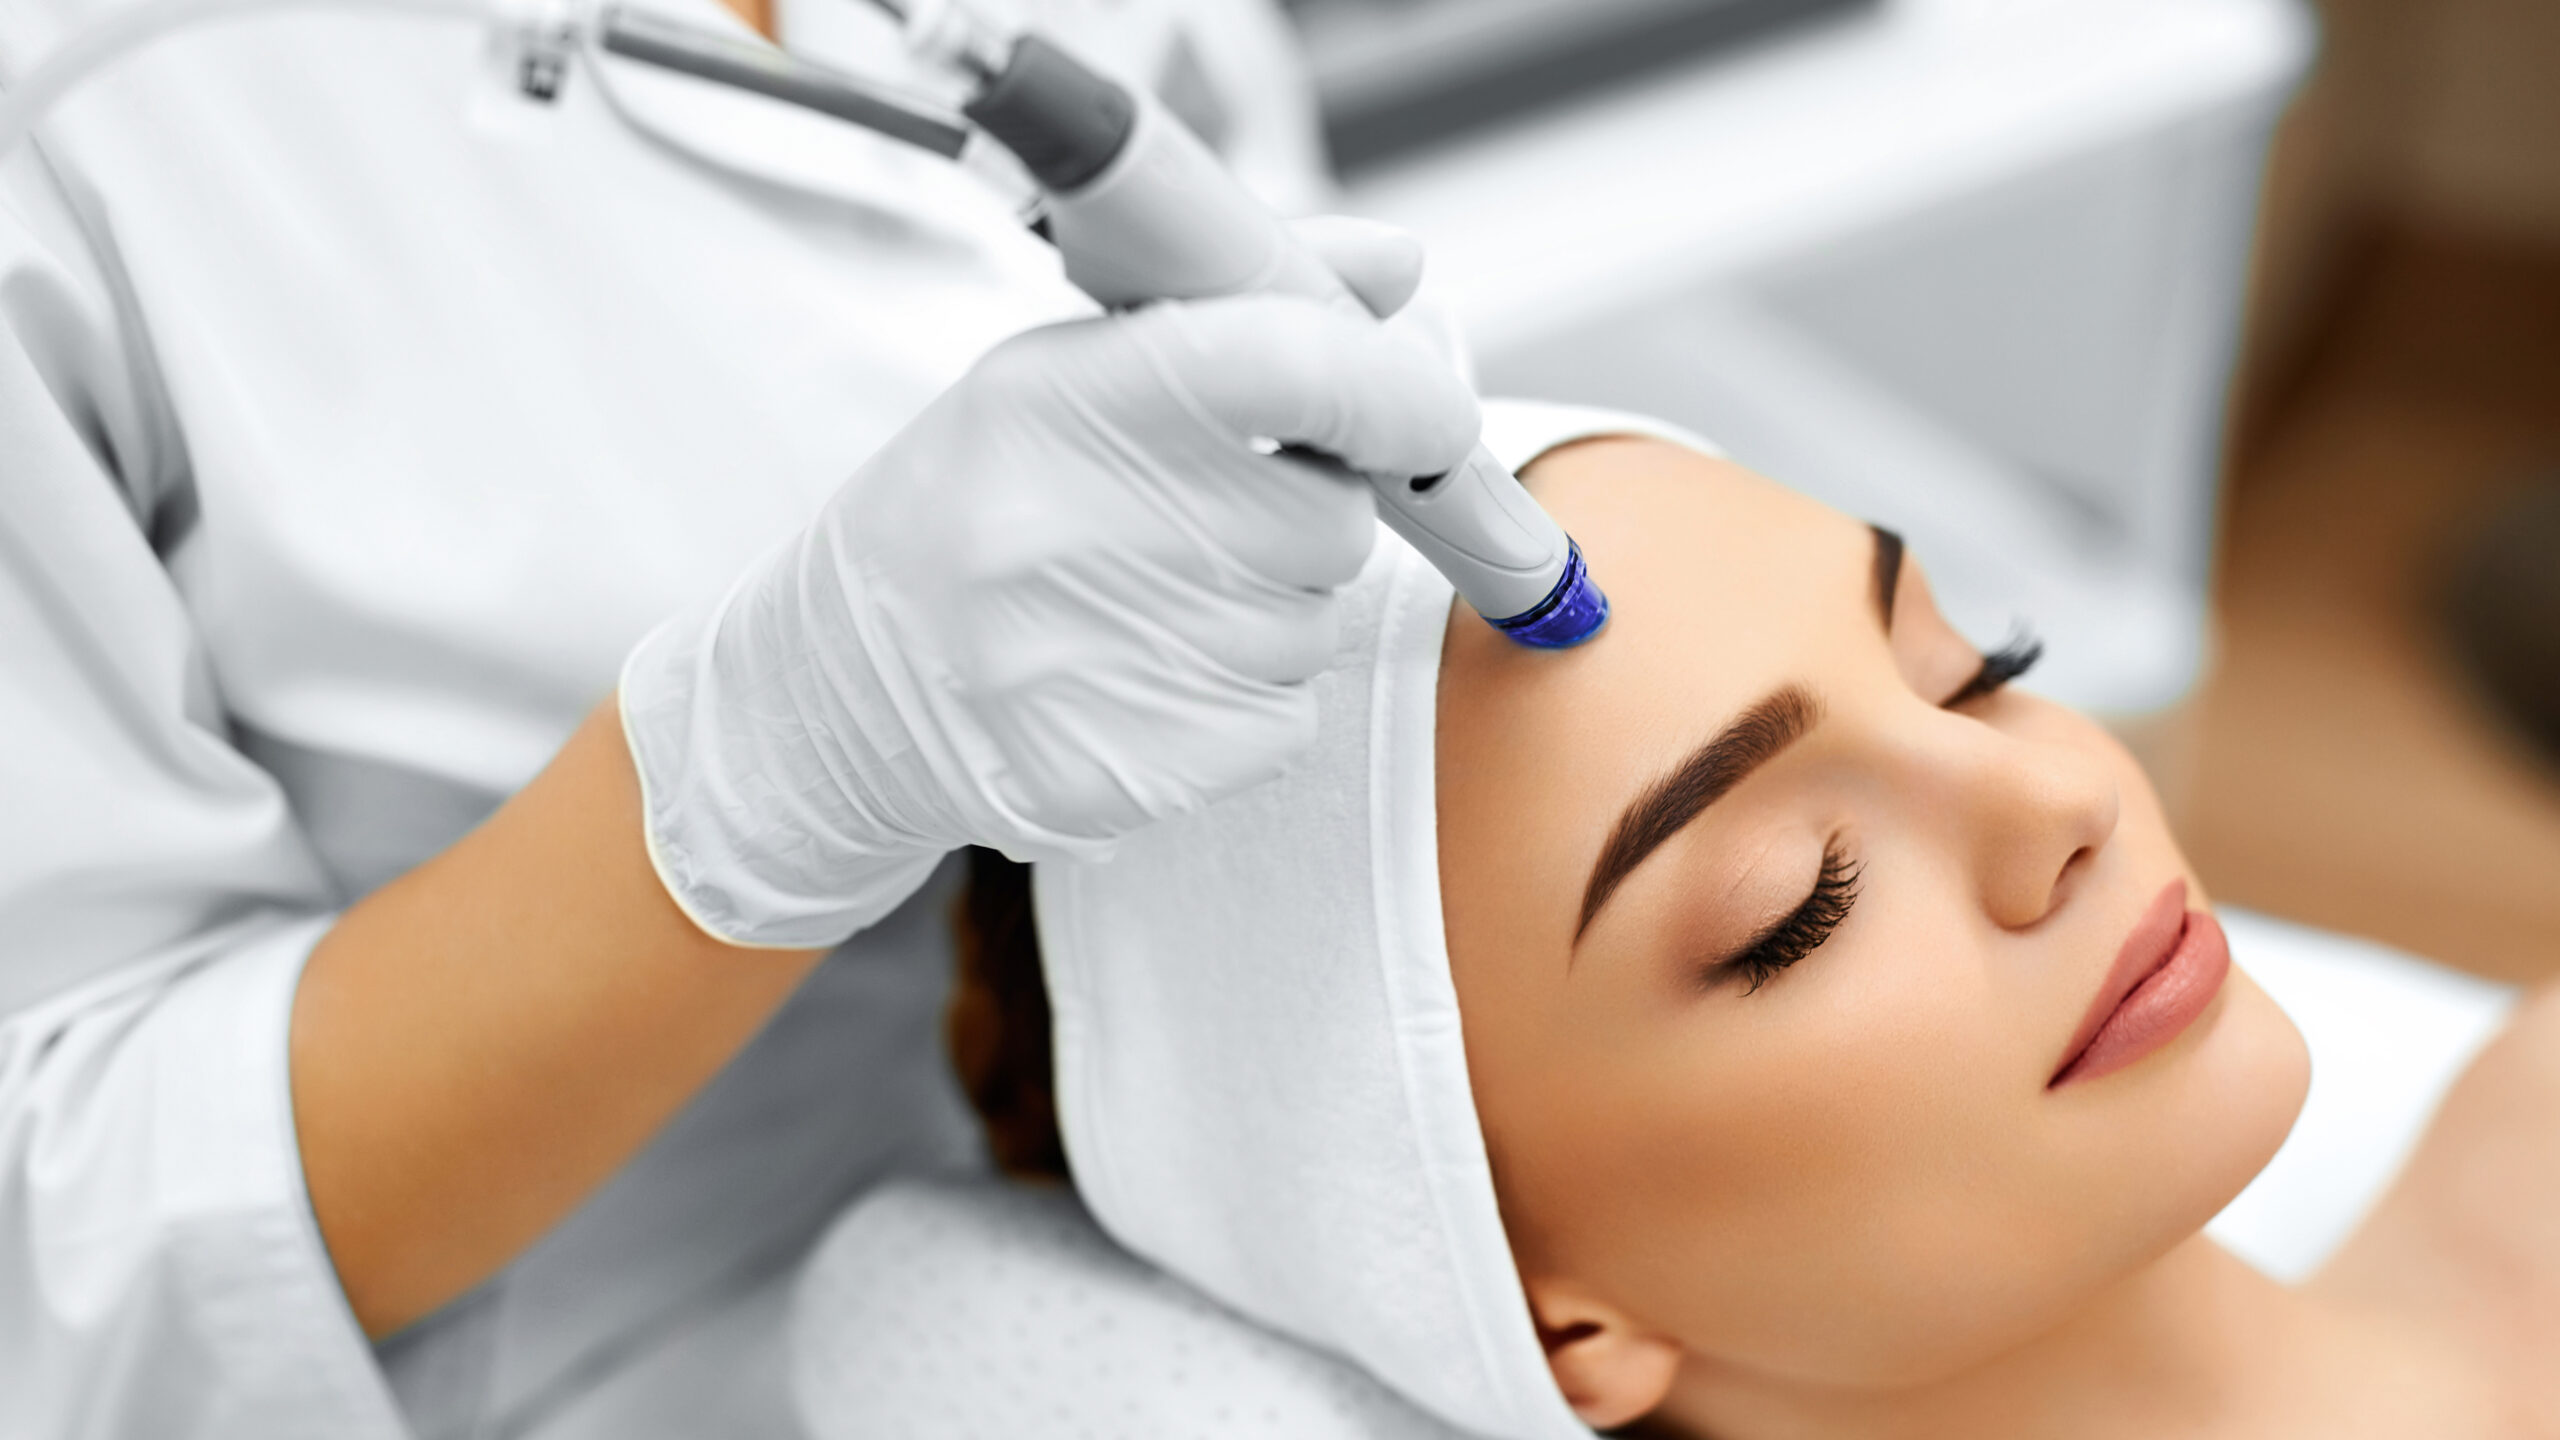 MedSpa vs Day Spa – What’s the Difference?